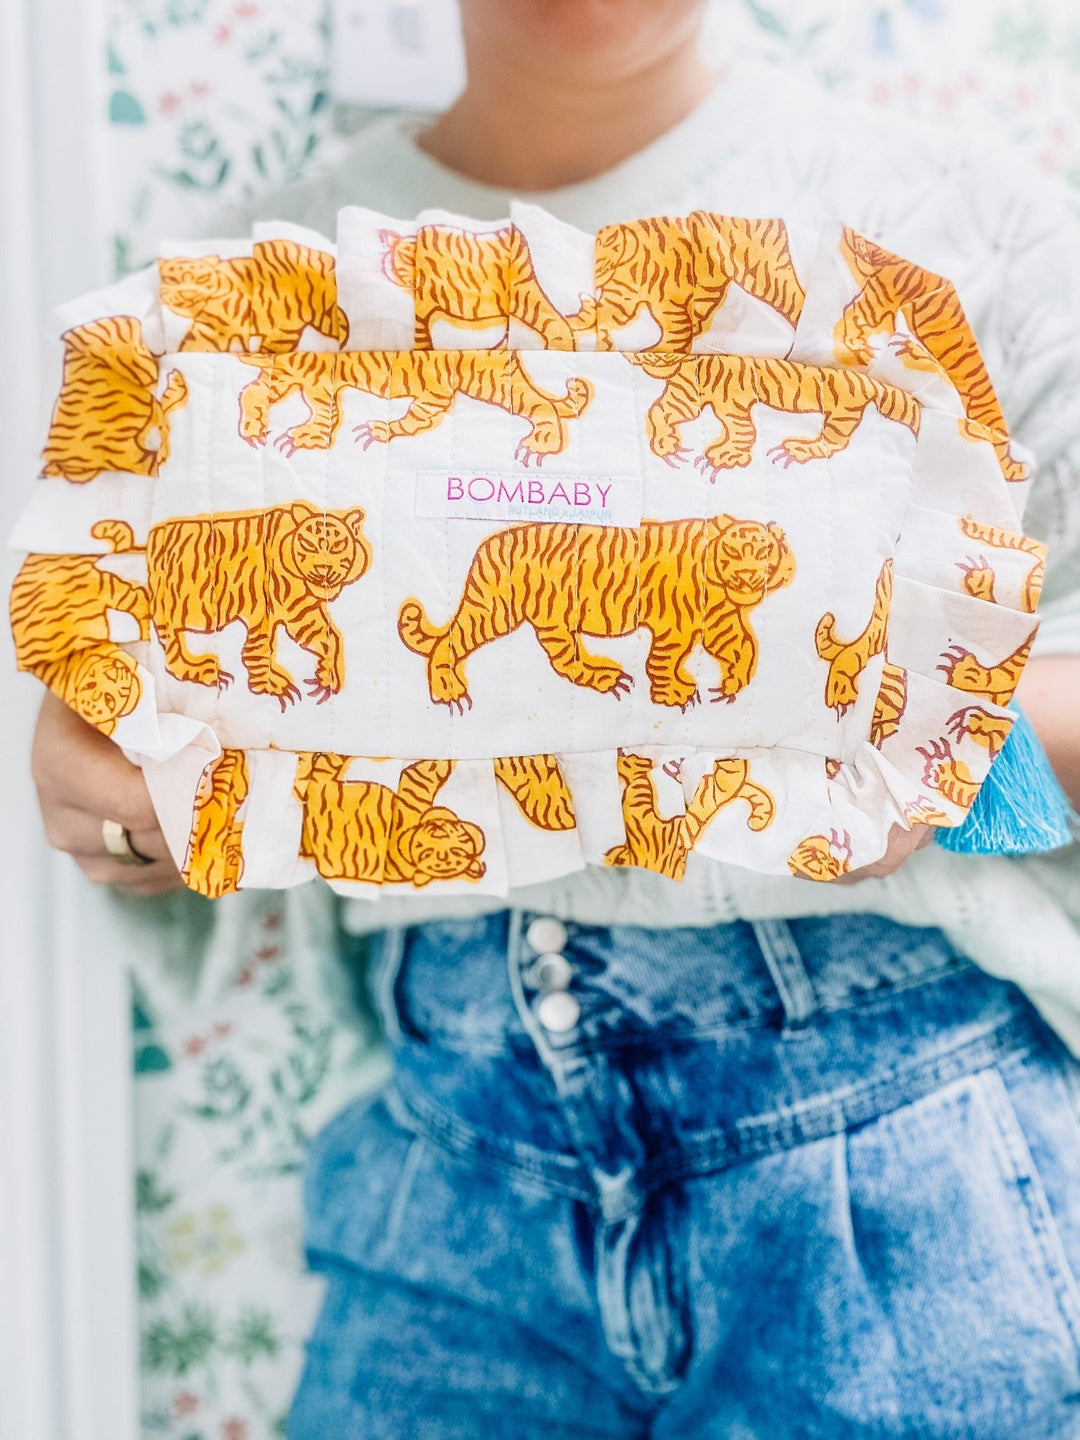 Handmade Quilted Ruffle Pouch - Indian Tiger - Bombaby